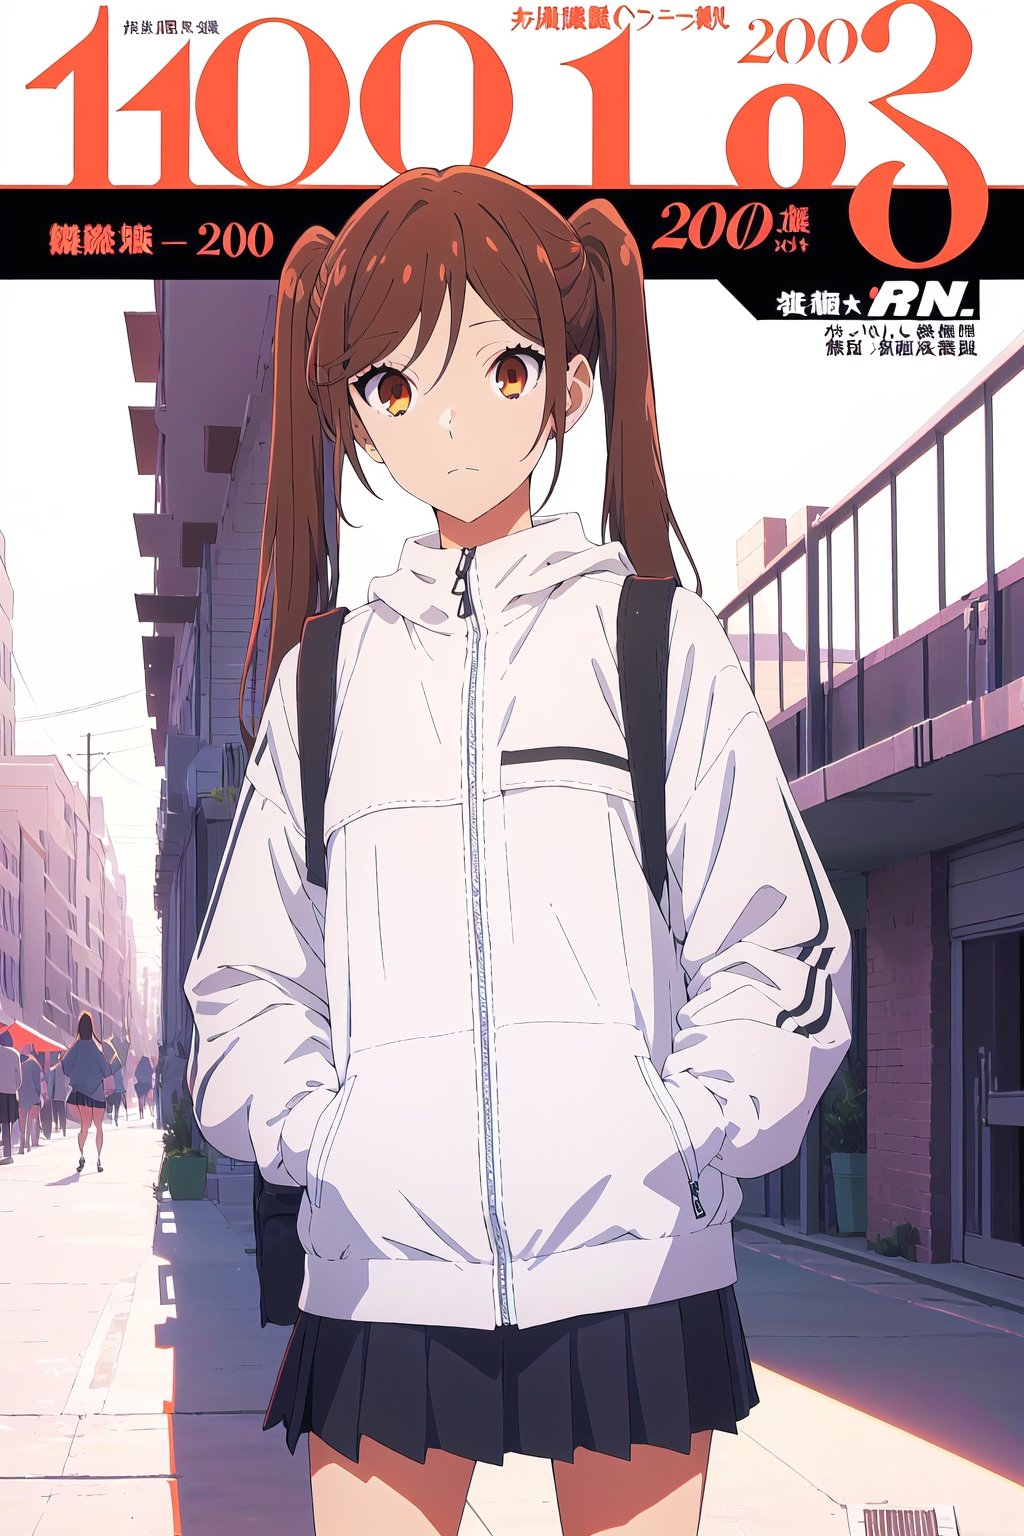 2000s fashion,horimiya_hori,1girl,20 years old,brown eyes,magazine cover,modeling pose, standing,foreground,dominant,pov_eye_contact,arm warmers,mini skirt, tube top,long pigtails, white background, oversized windbreaker jacket